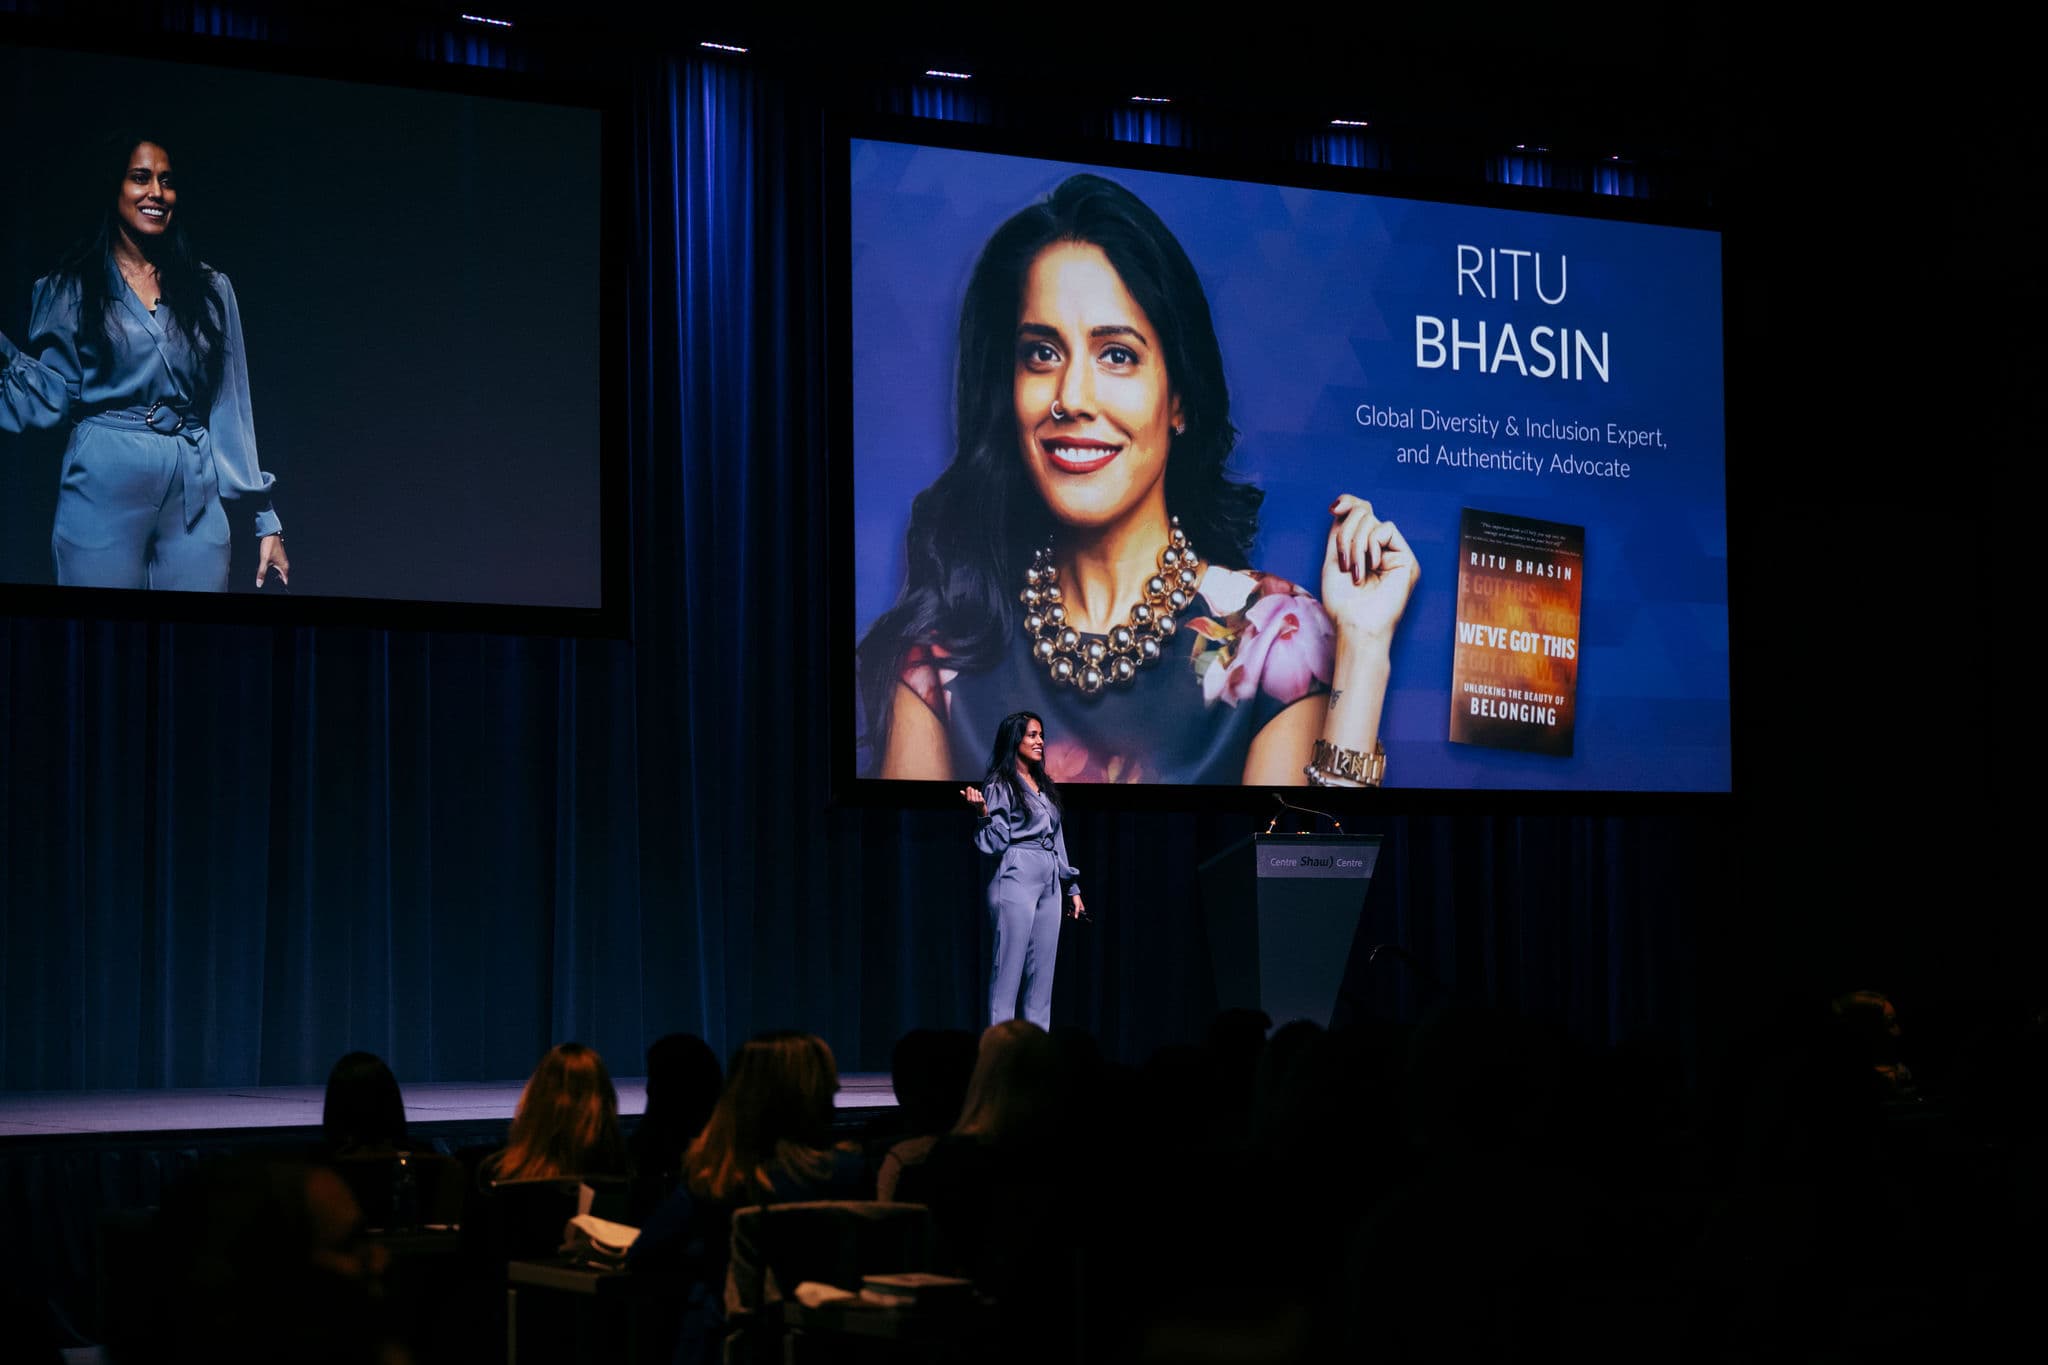 Ritu Bhasin on stage in Canada Hall speaking to the audience